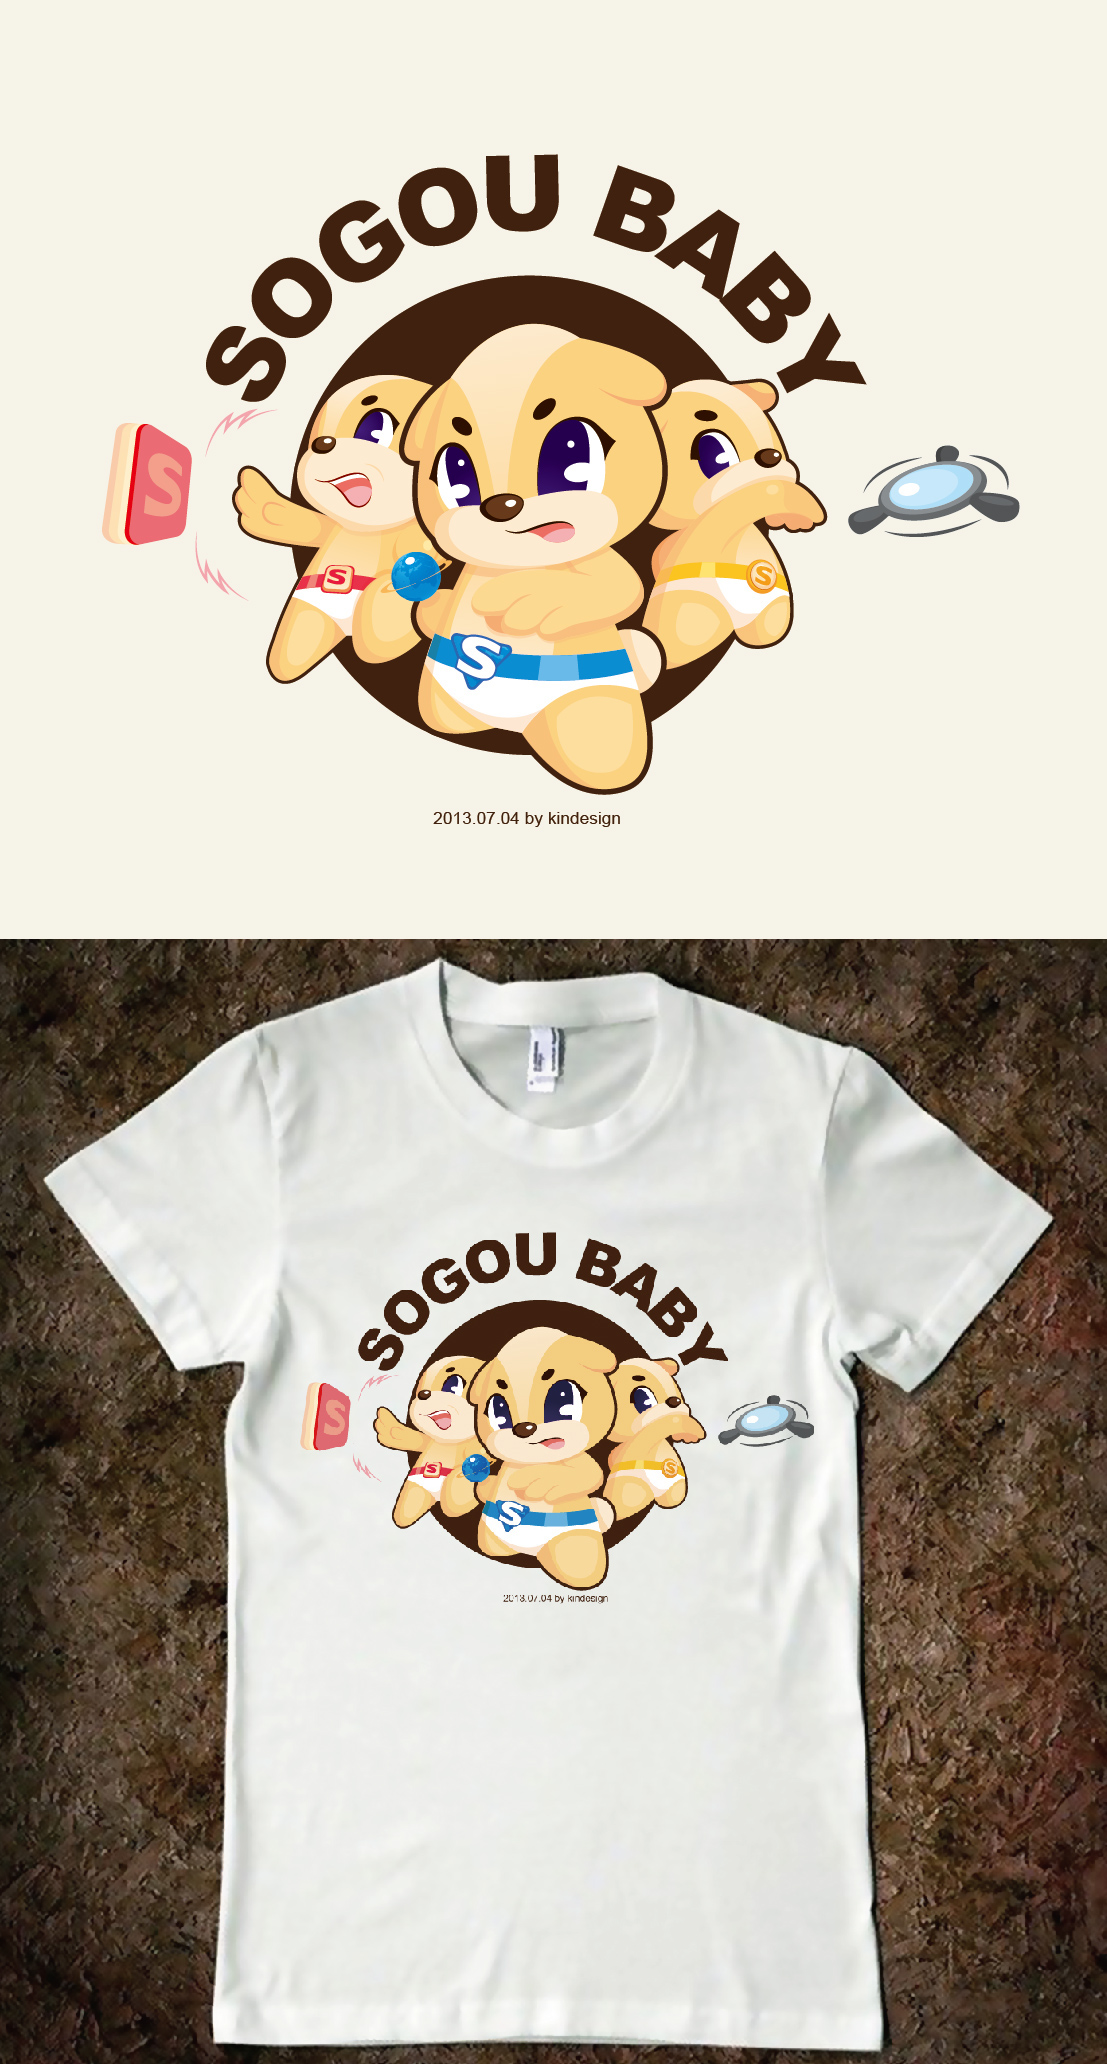 sogou baby Smart lovely clever